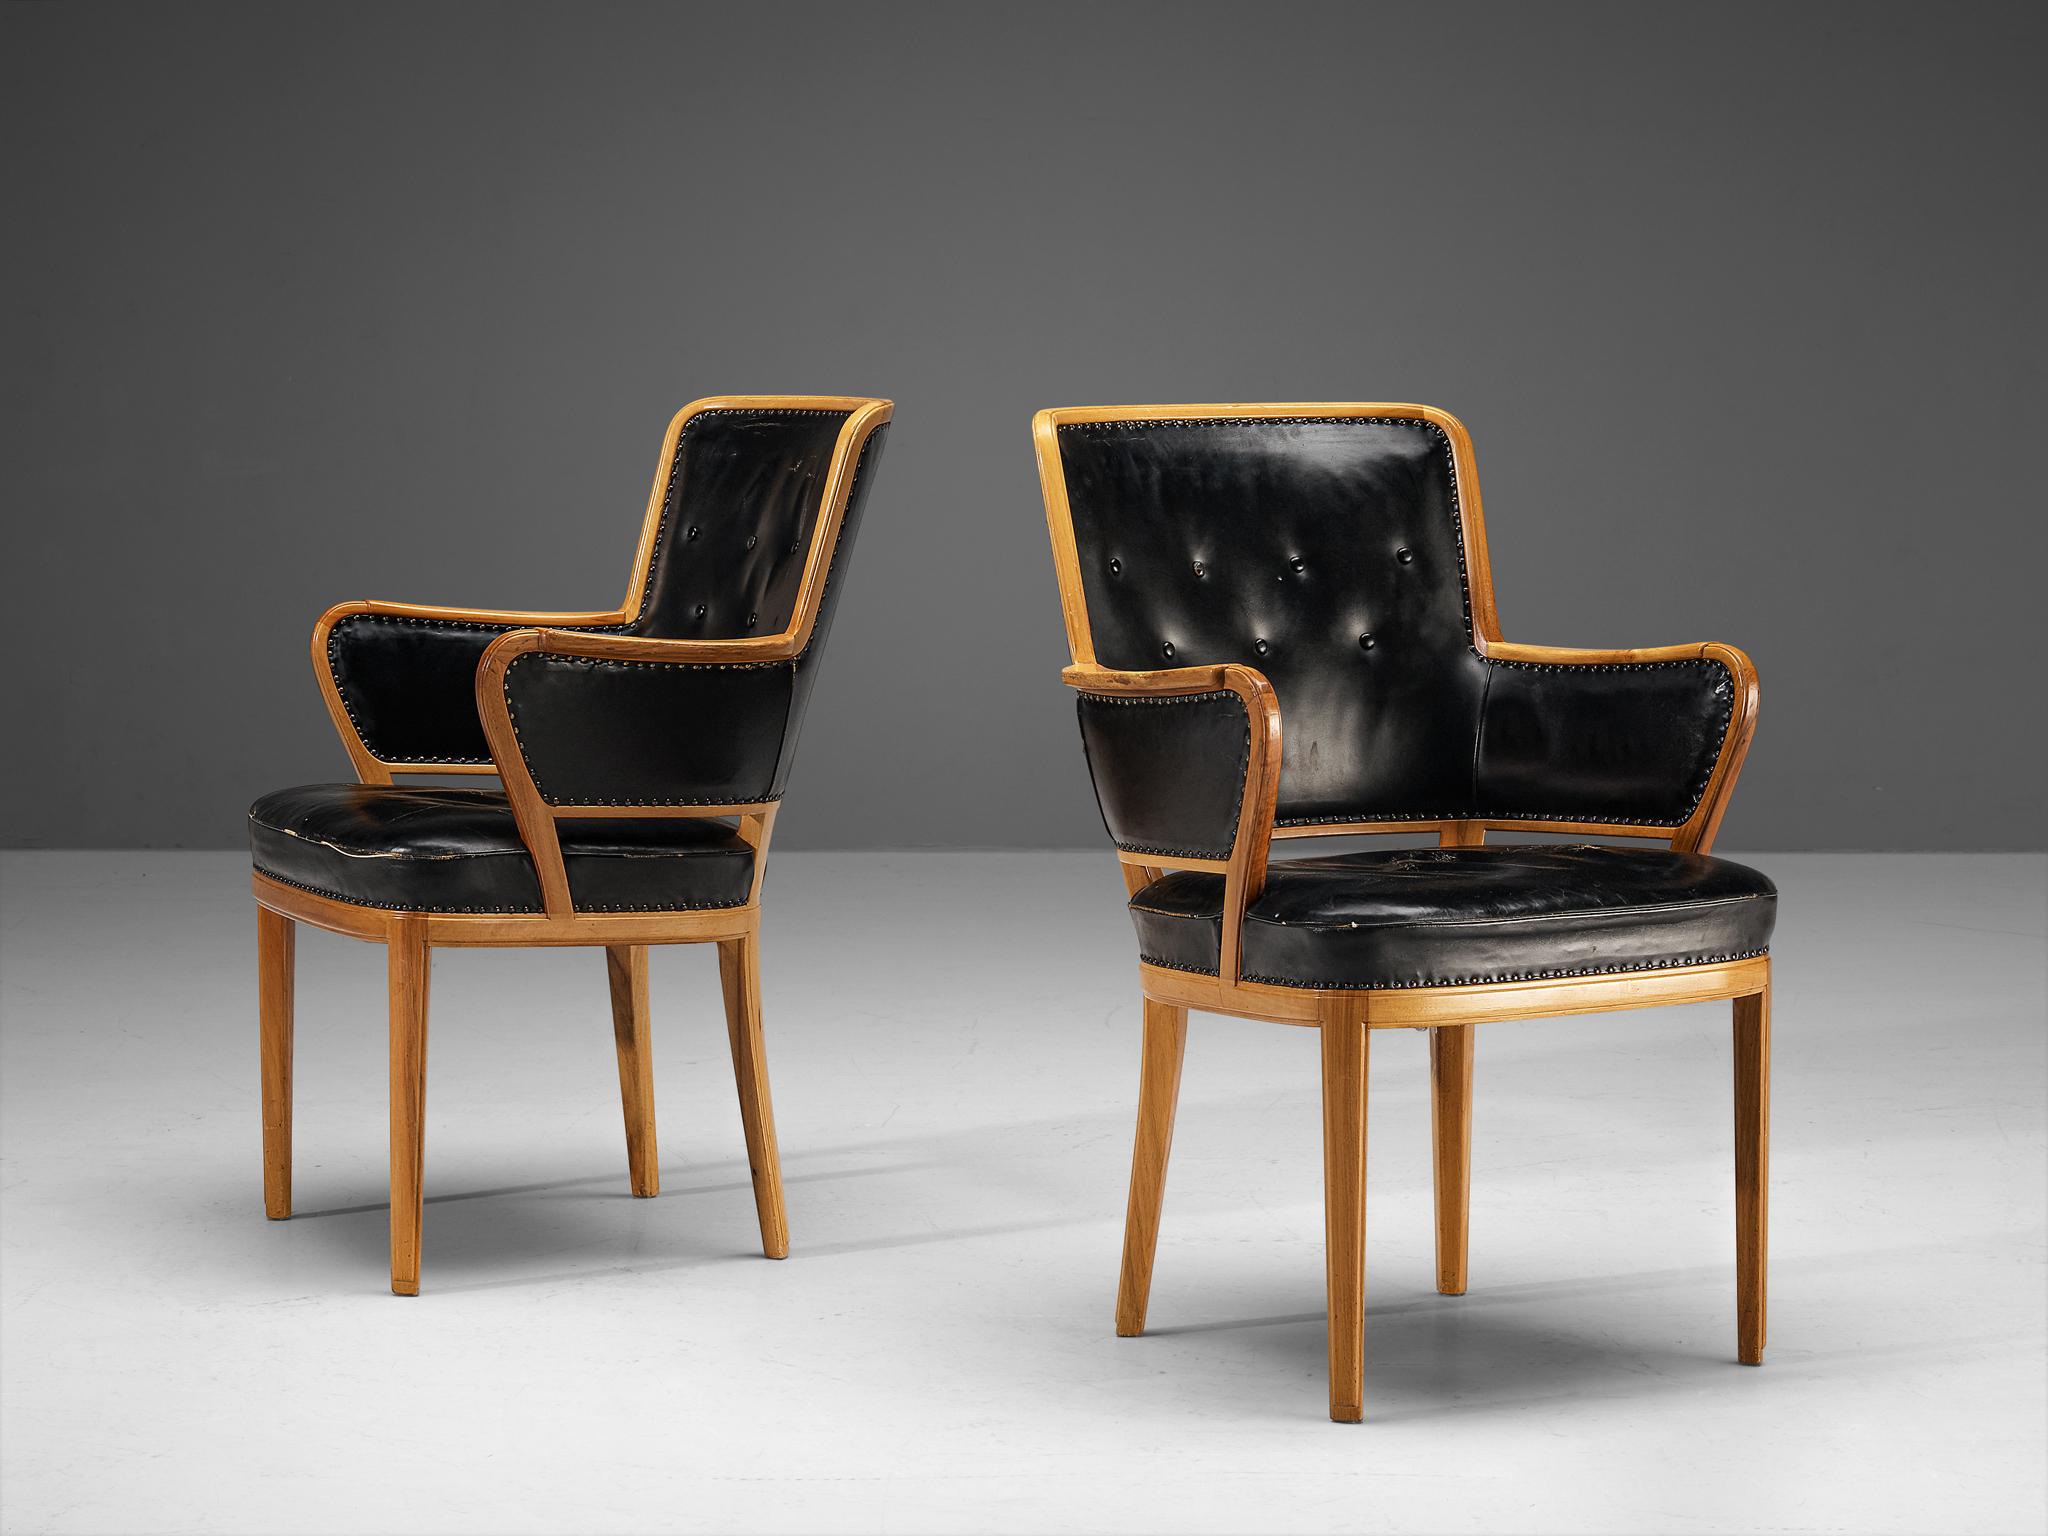 Carl Malmsten, pair of armchairs, walnut, leather, Sweden, 1940s. 

Rare pair of armchairs designed by Swedish designer Carl Malmsten. These chairs contain a warm walnut frame which is nicely visible, and the grain pattern comes out beautifully as